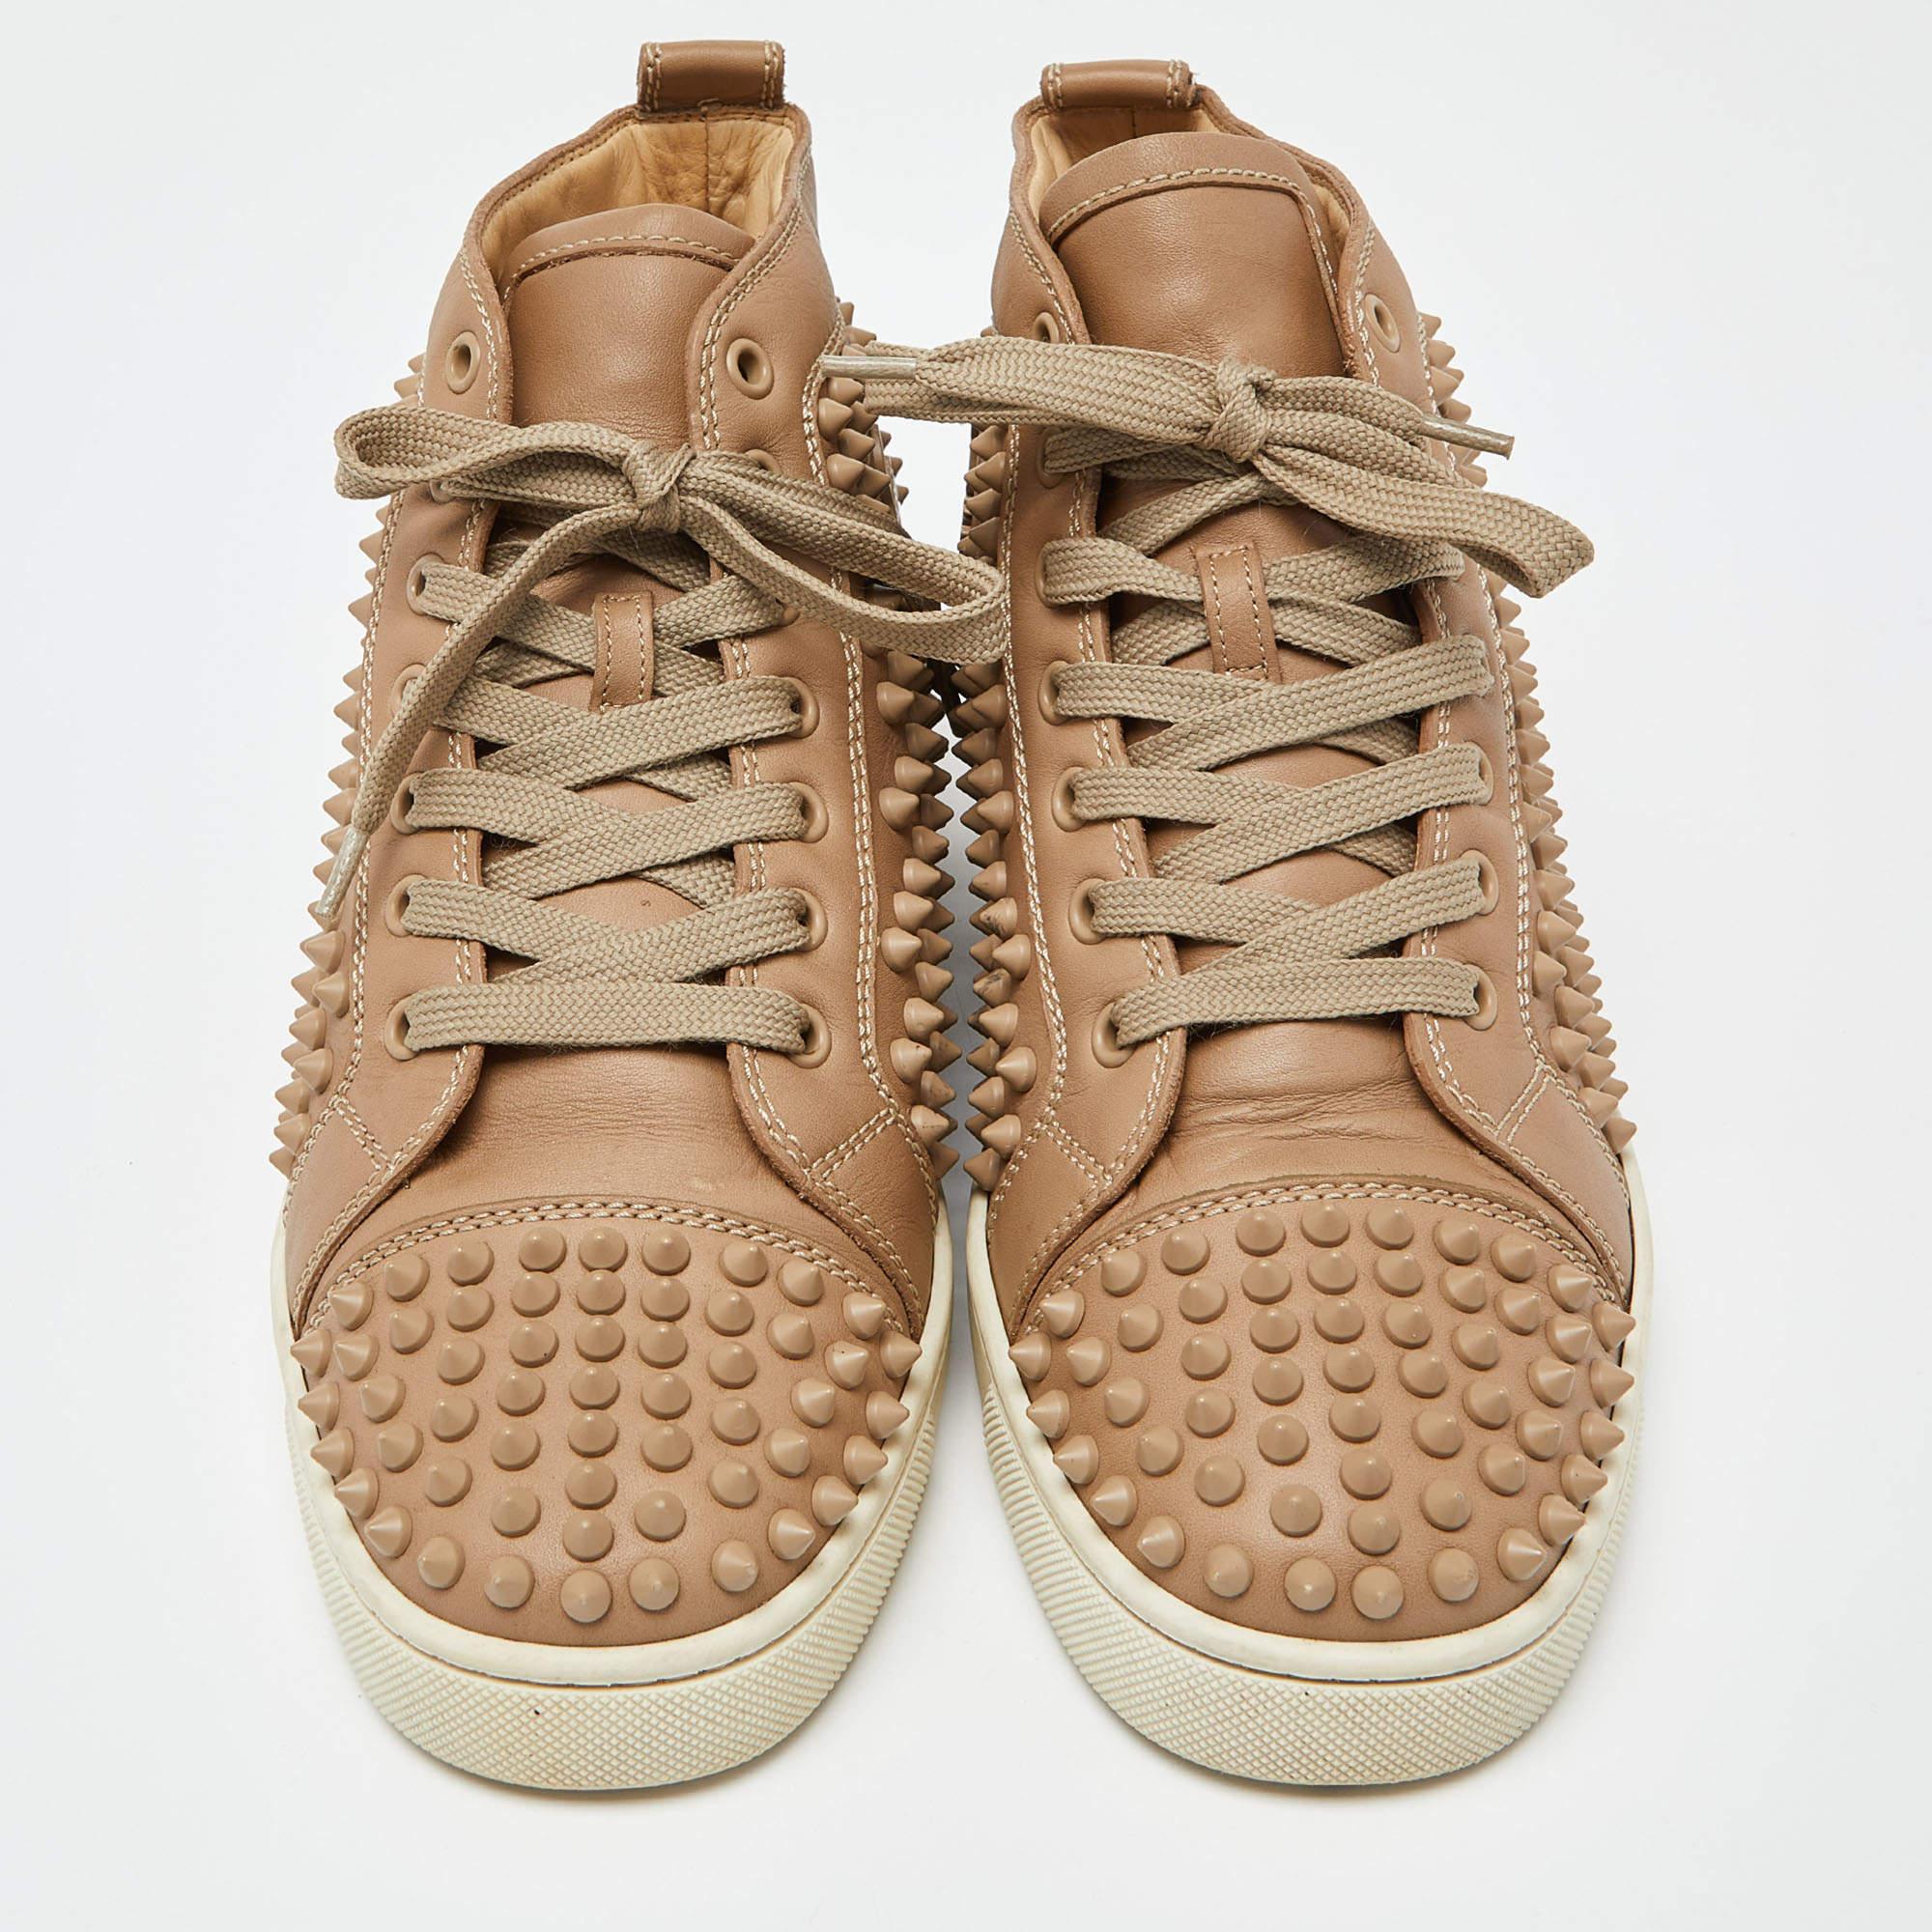 Christian Louboutin Beige Leather Louis Spike High Top Sneakers Size 39.5 In Good Condition For Sale In Dubai, Al Qouz 2